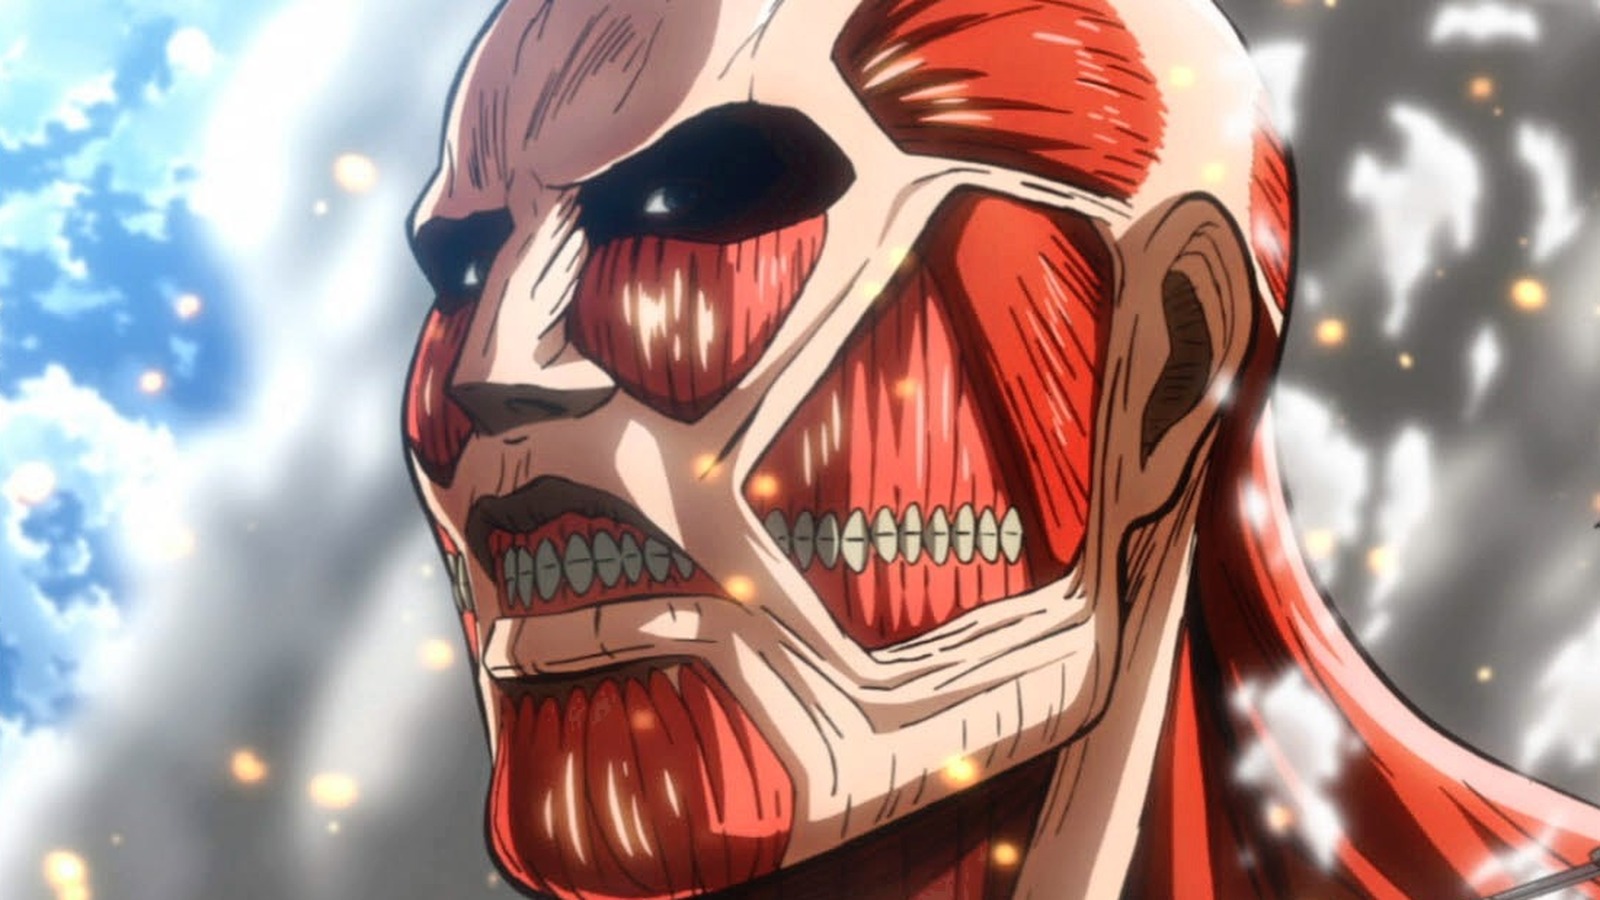 15 Absolute Best Attack On Titan Characters, Ranked